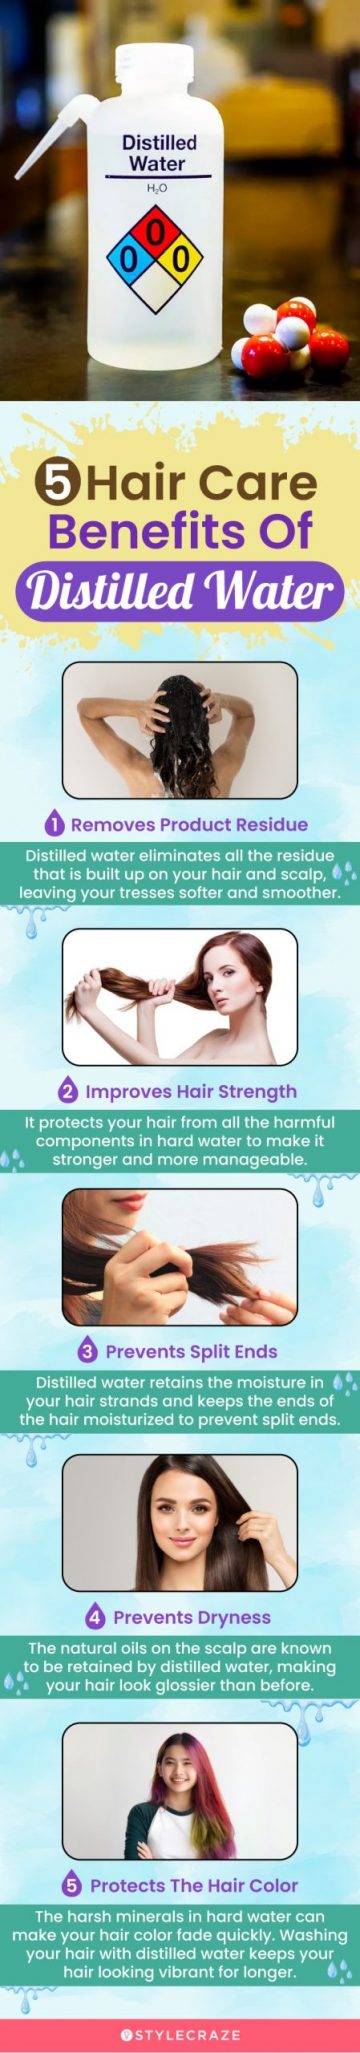 5 hair care benefits of distilled water (infographic)